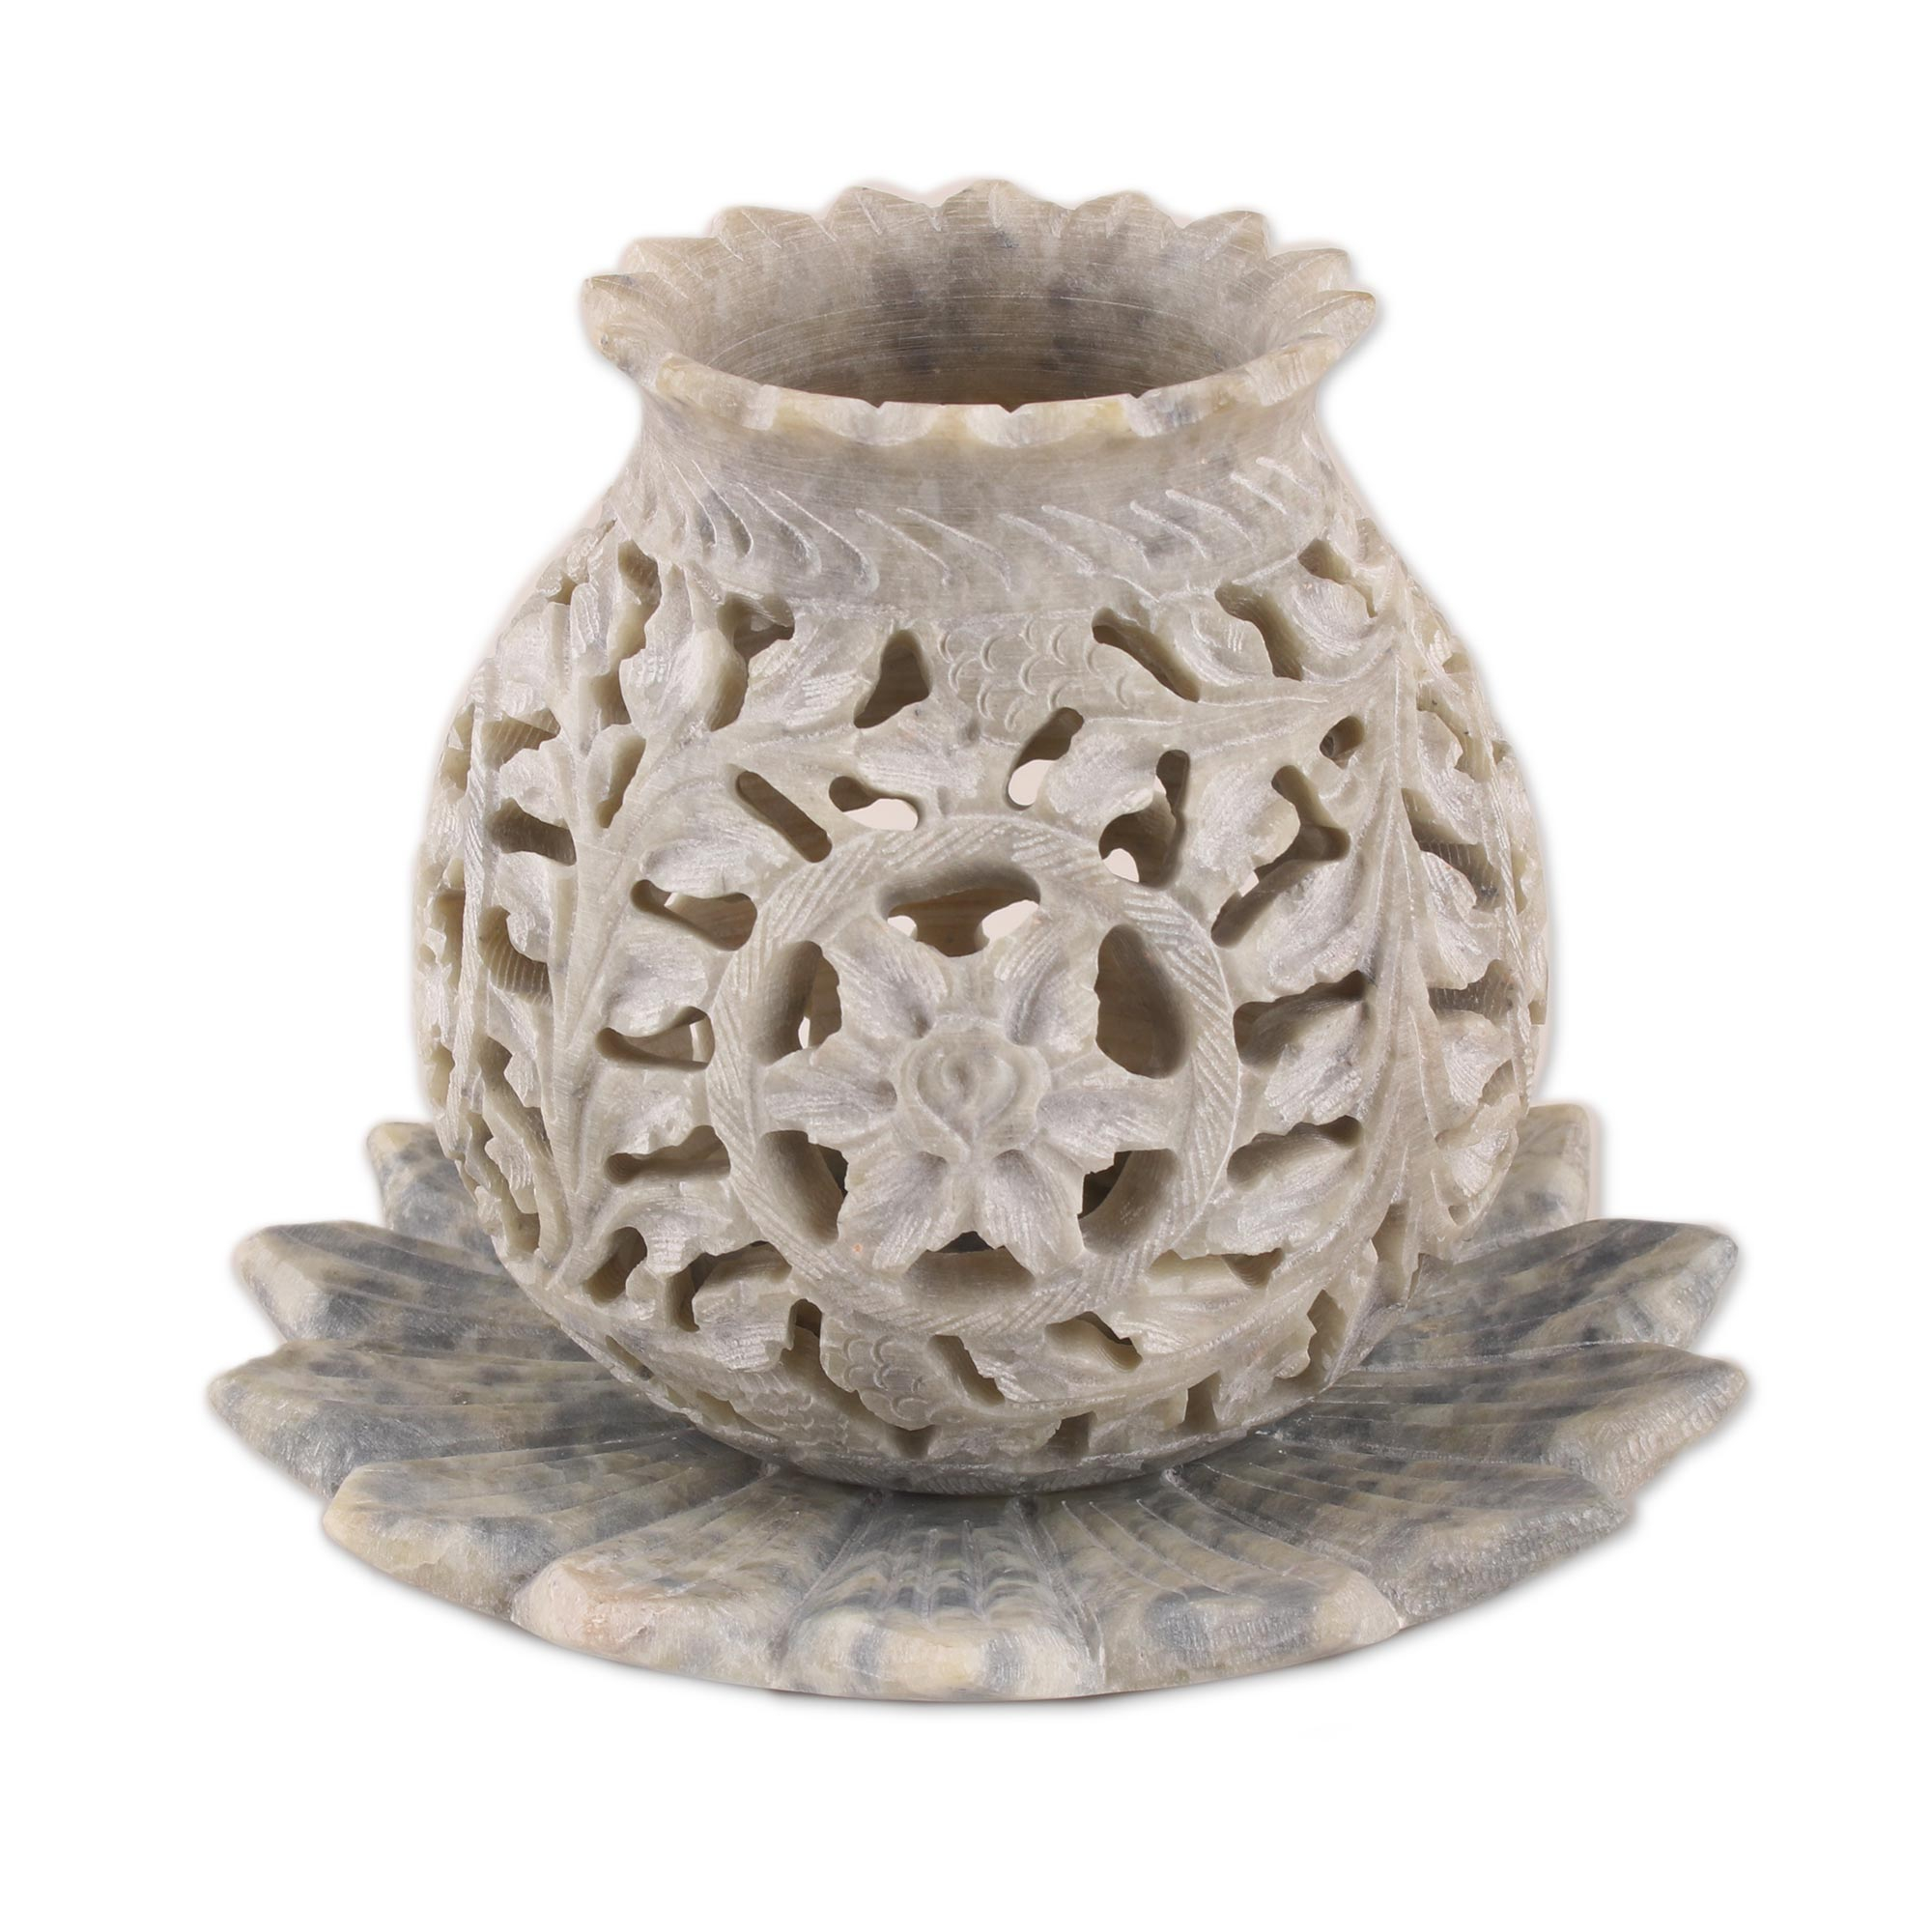 Diwali Gifts from India Decorative Home Decor Soapstone Centerpiece Crossingsevenseas Stone Tealight Holder with Flower Motifs and Intricate Tendril Openwork 